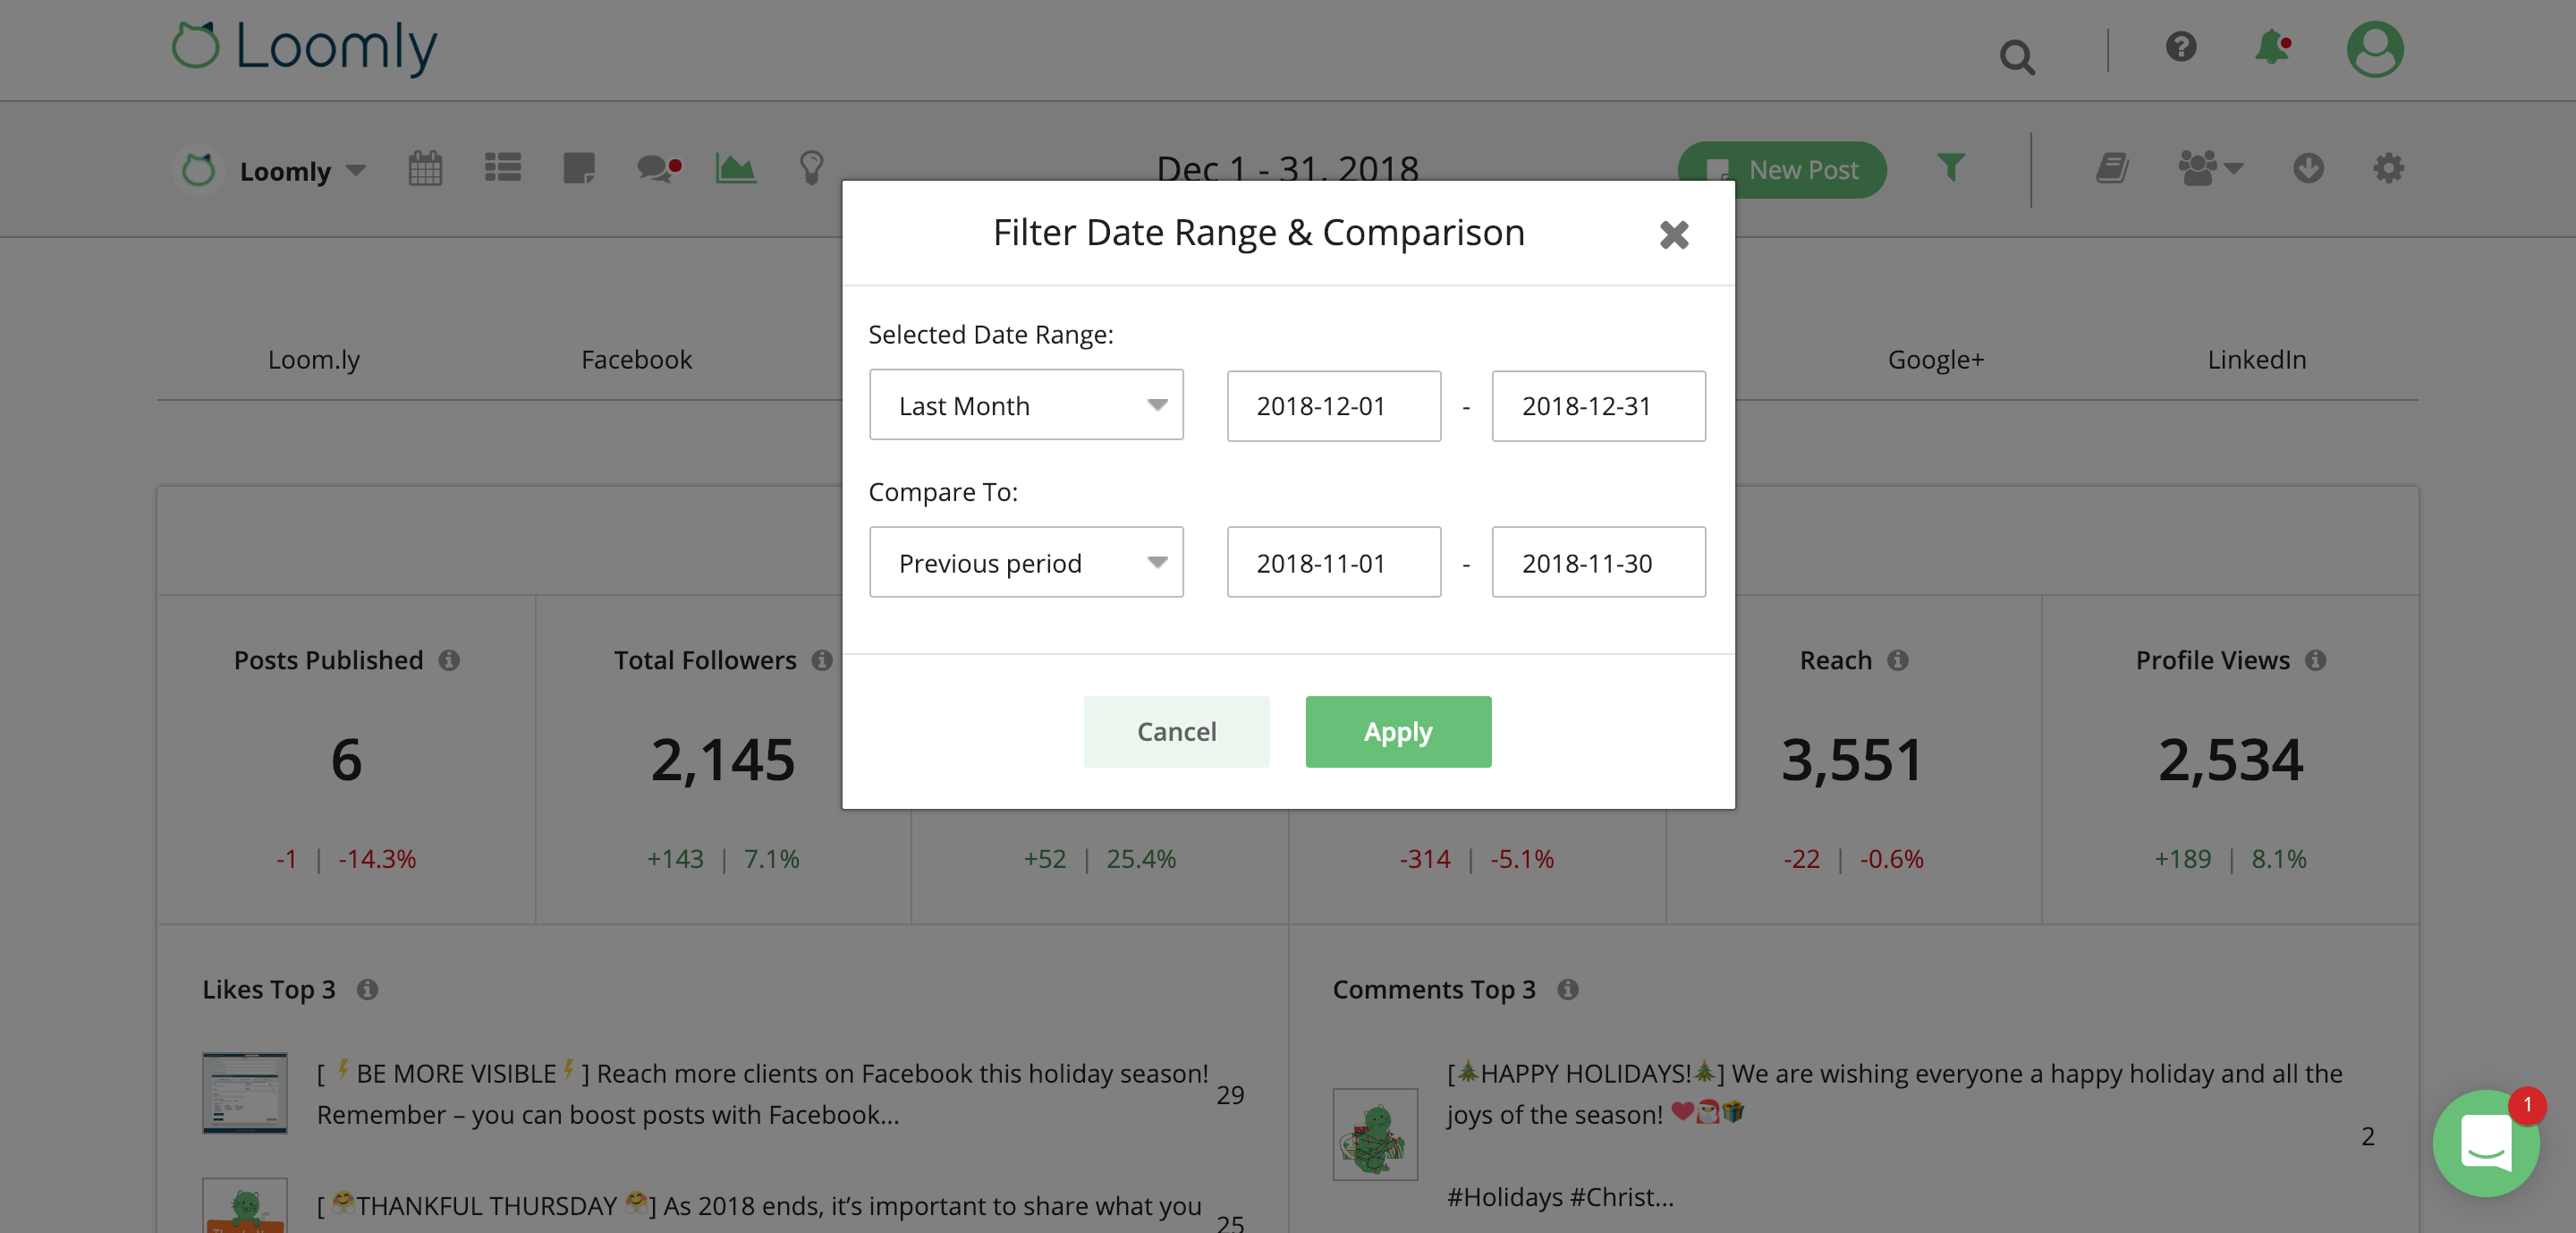 Loomly Advanced Analytics Date Filter